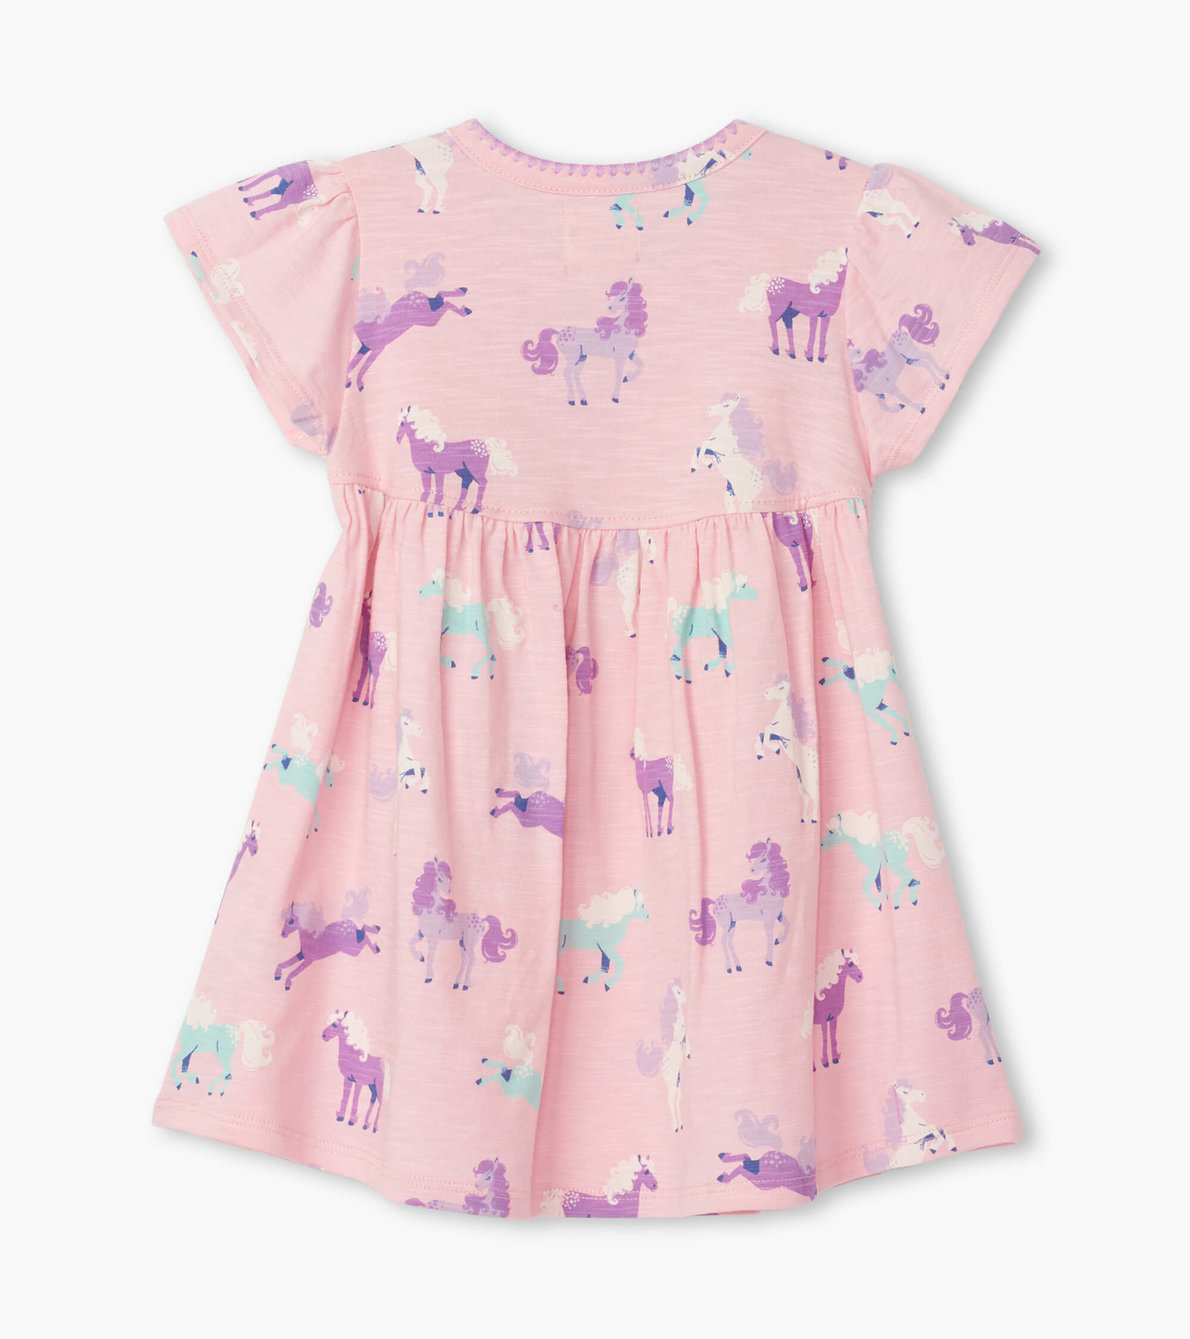 View larger image of Playful Ponies Baby Puff Dress